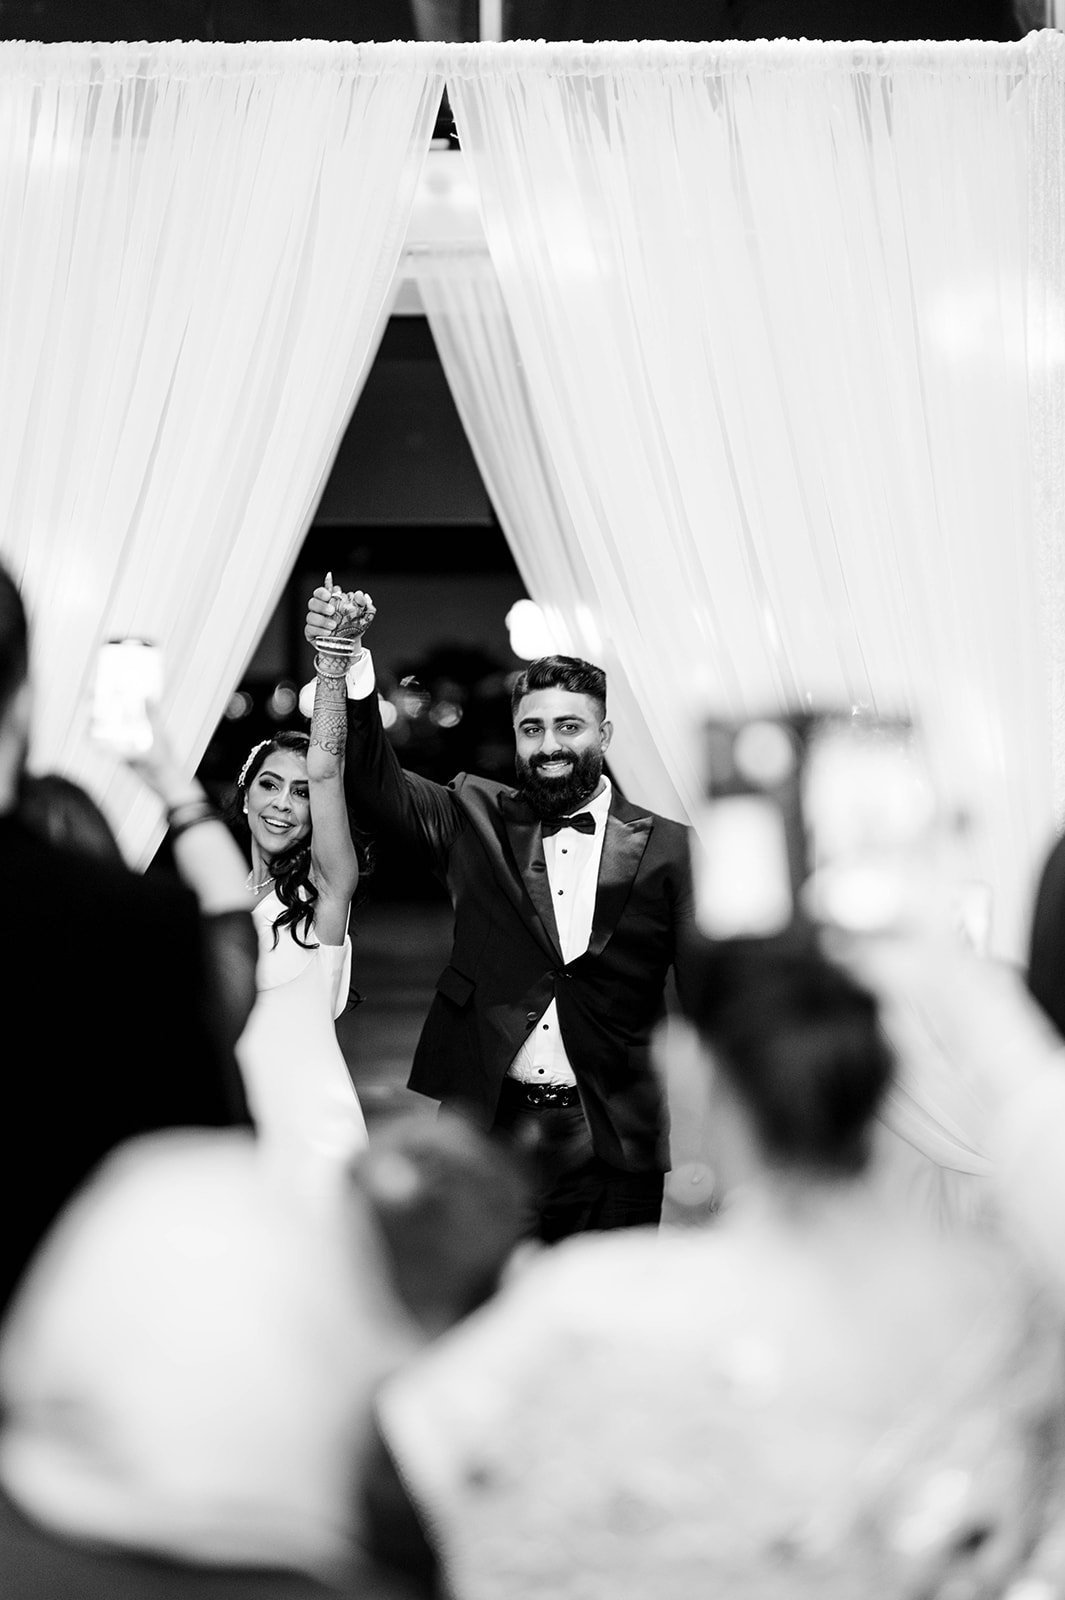 A bride and groom raise their arms triumphantly as they enter their wedding reception.  